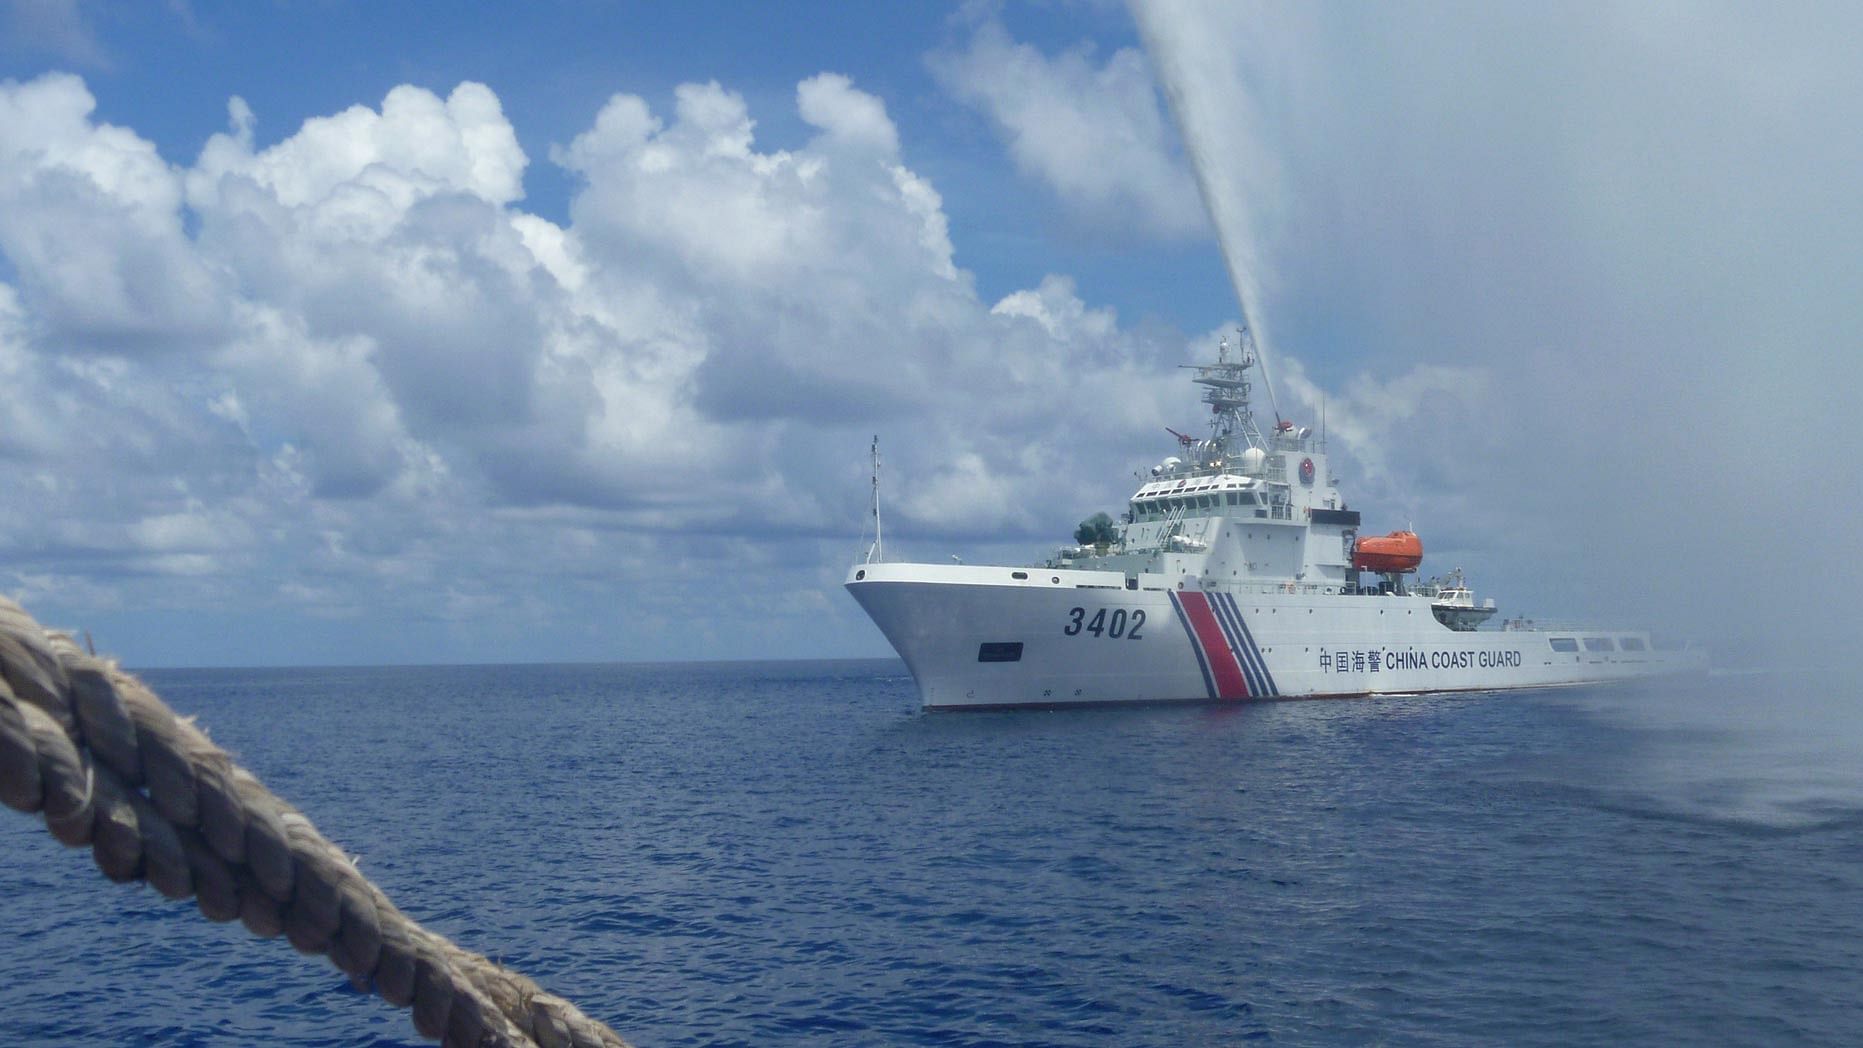 A Chinese Coast Guard ship in the South China Sea. Image used forrepresentation.